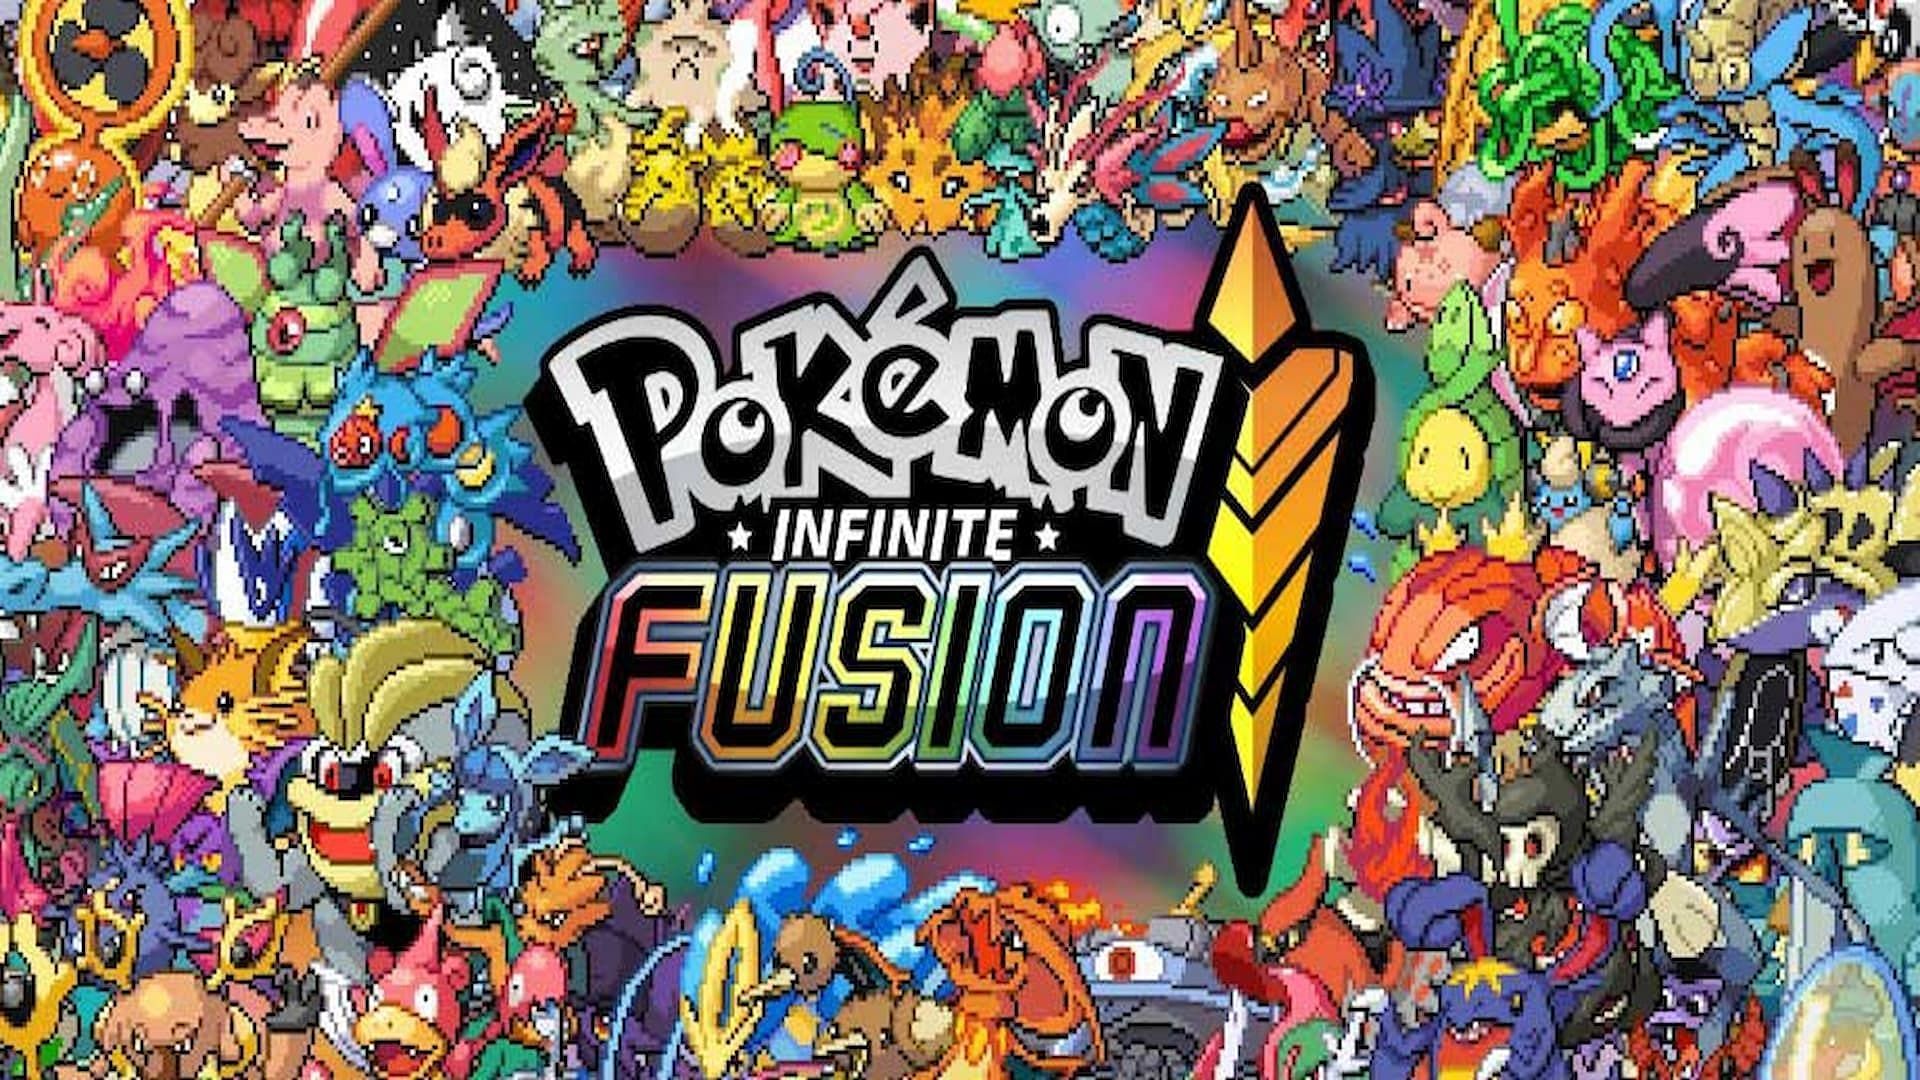 What is Pokemon infinite Fusion and how it stands out?